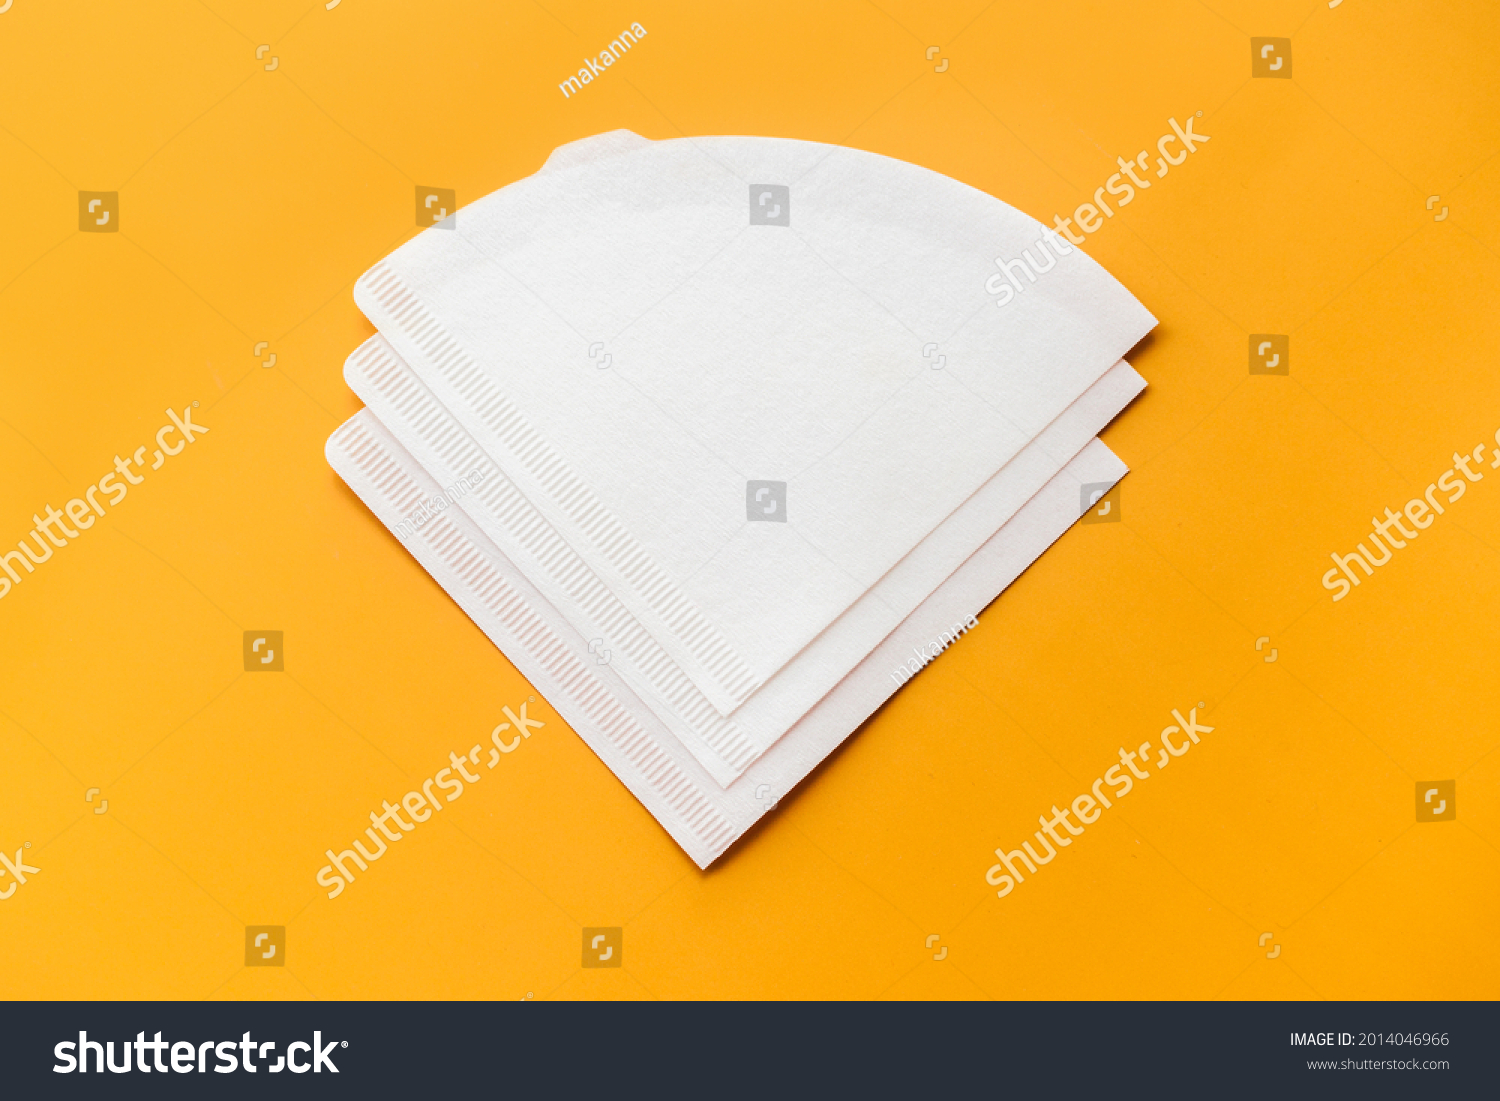 Bleached paper coffee filter isolated on yellow background. Alternative brewing pour over v60 concept. Minimalistic abstract background for store, shop, retail. mock up, top view, place for text #2014046966